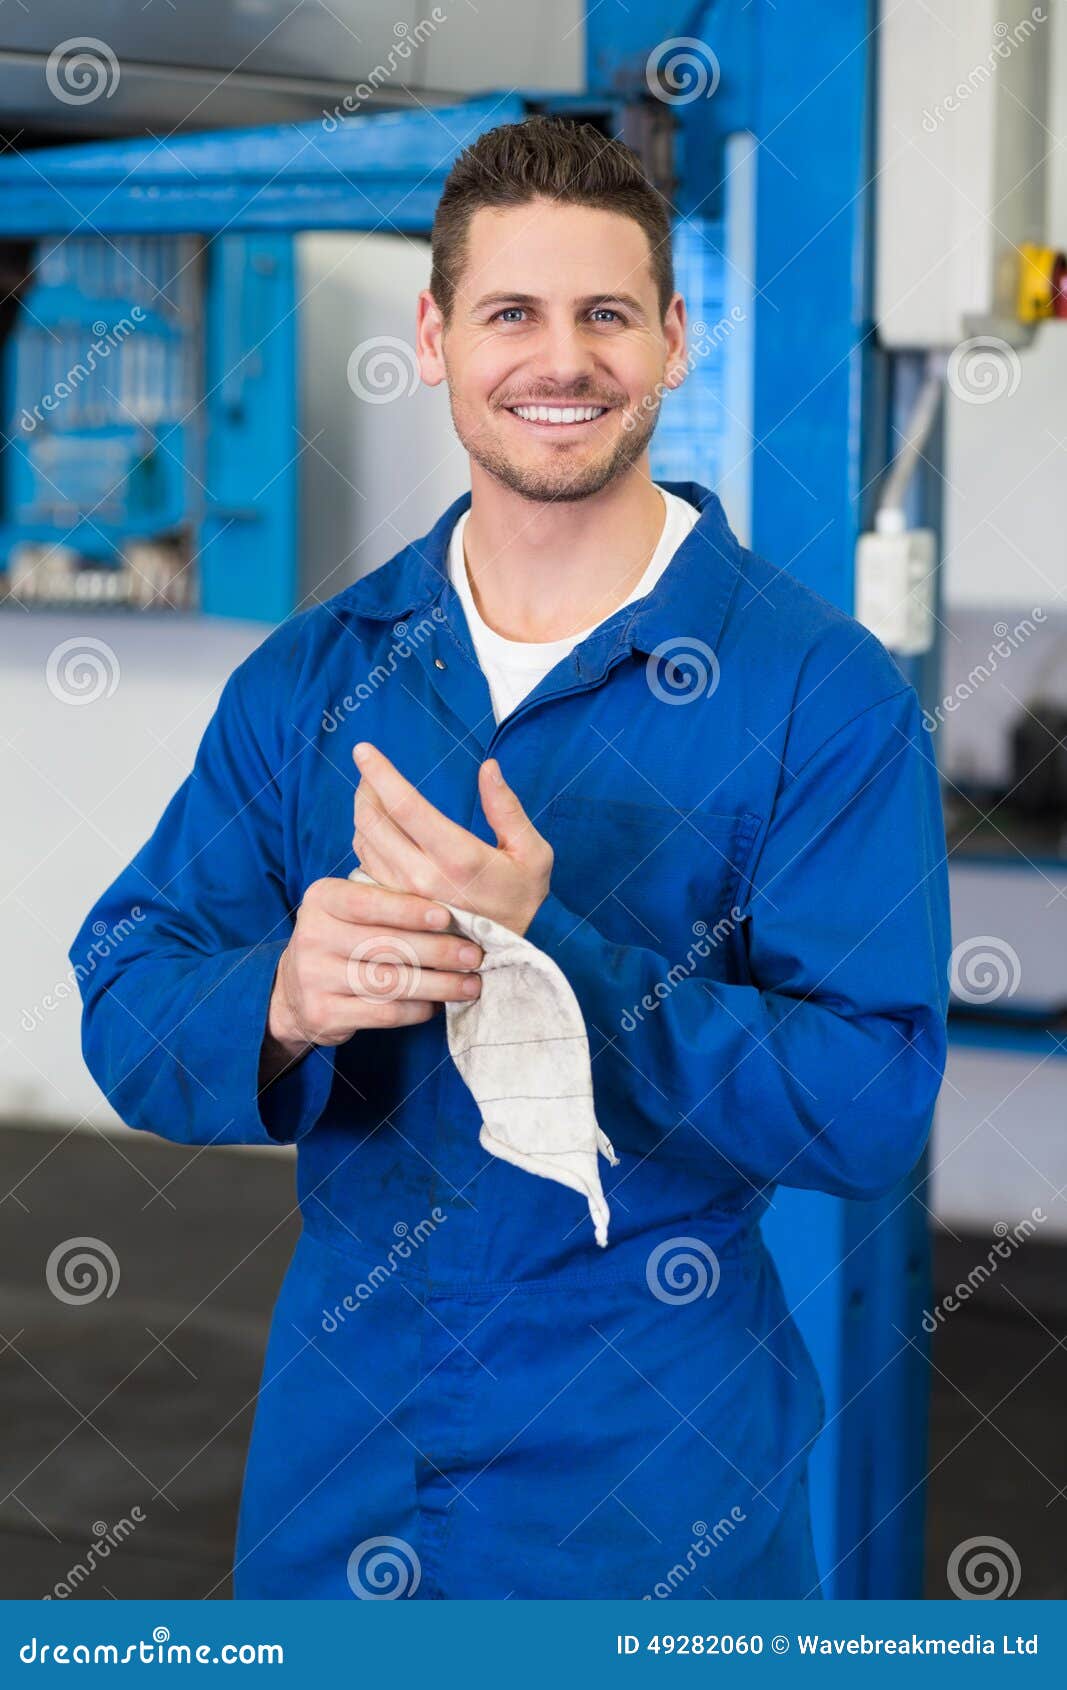 Mechanic’s hands revisited: is this sign still useful for ...